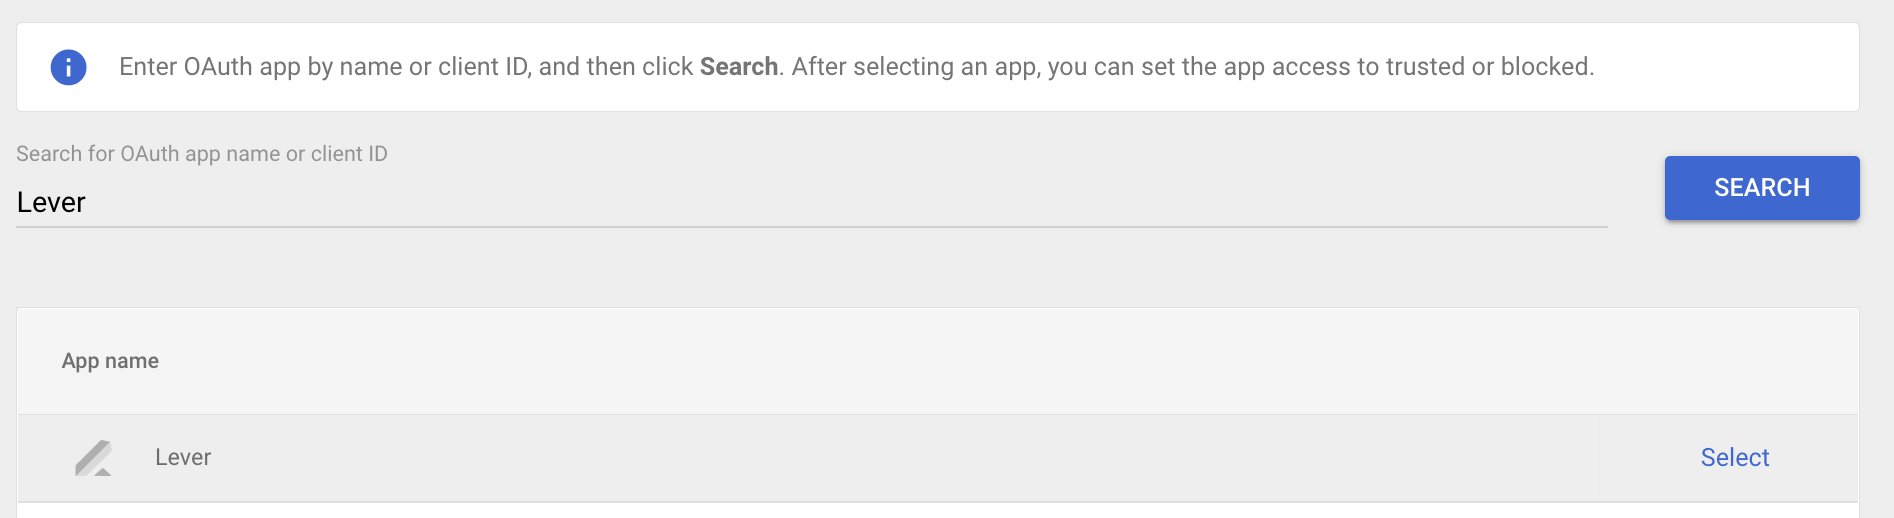 App search list with Lever typed into search field.